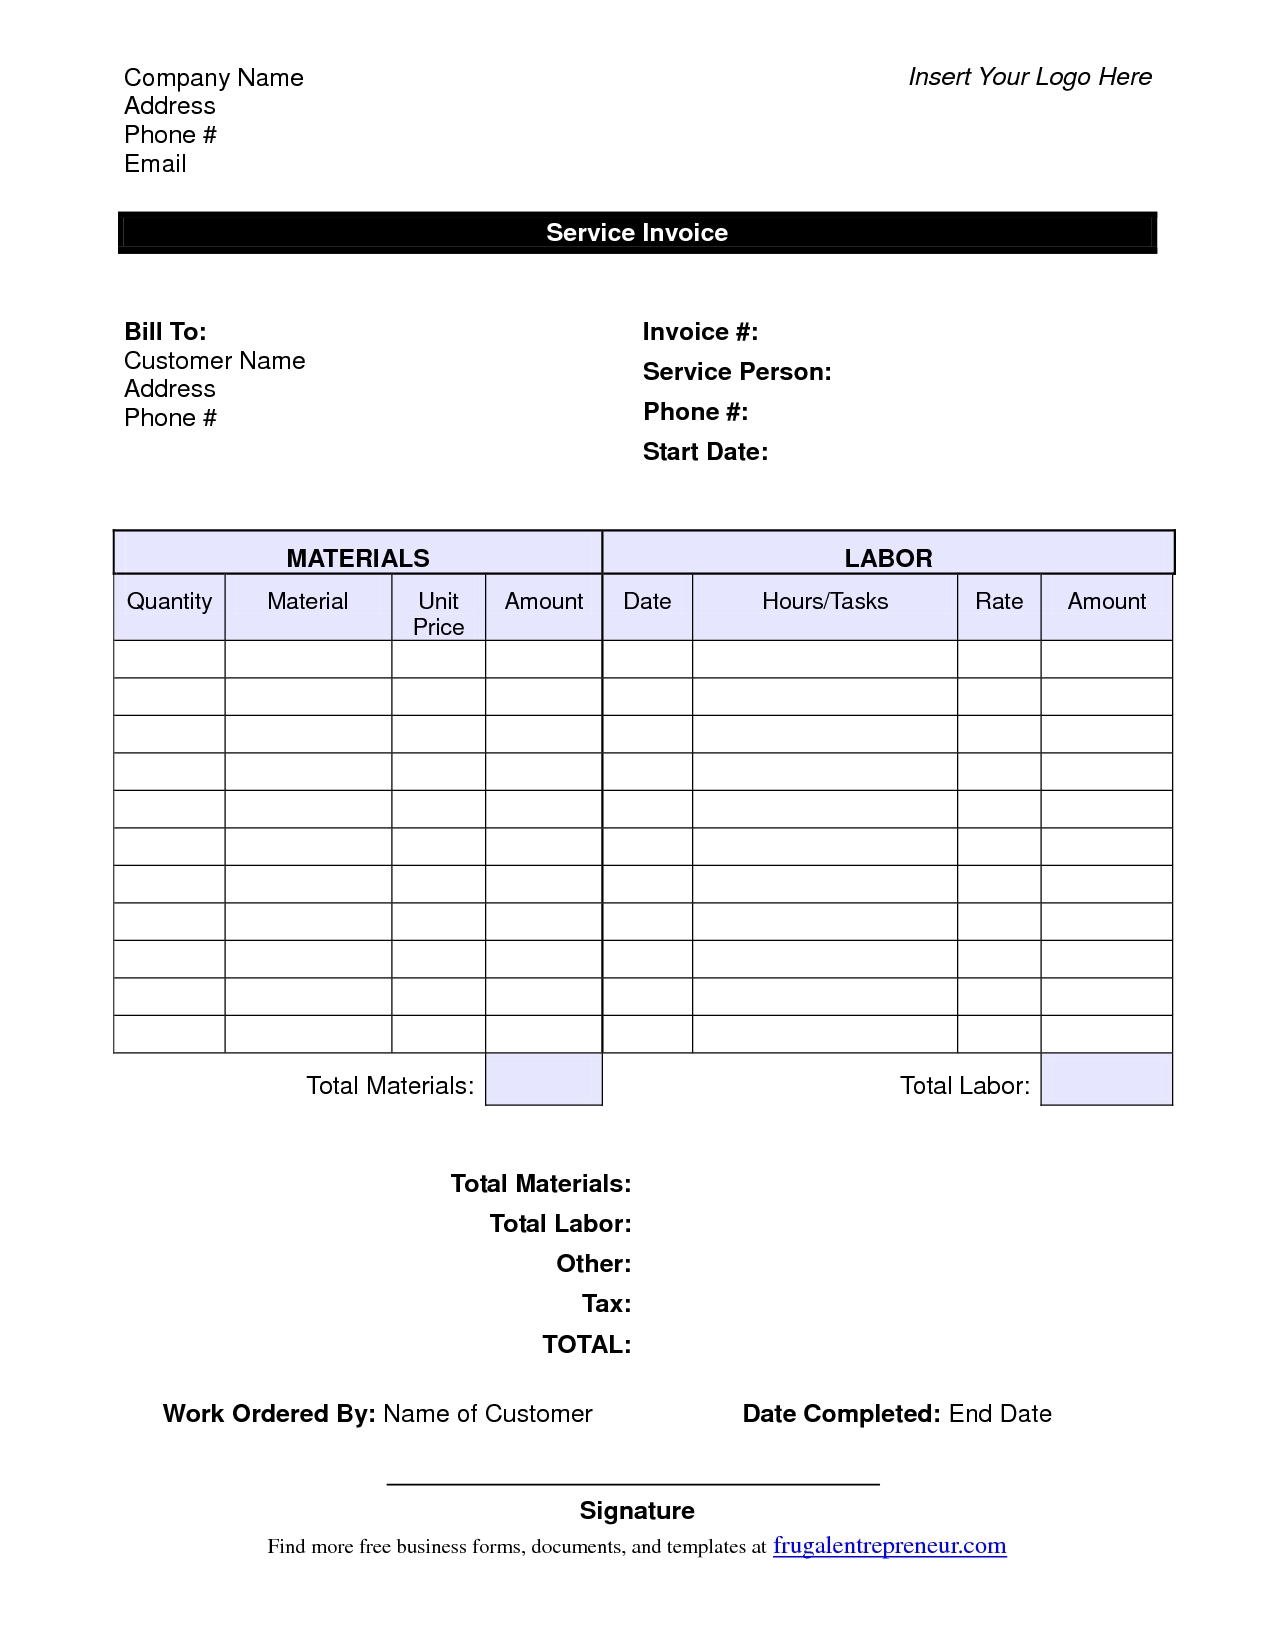 customer invoice template labor invoice template free free business template 1275 X 1650